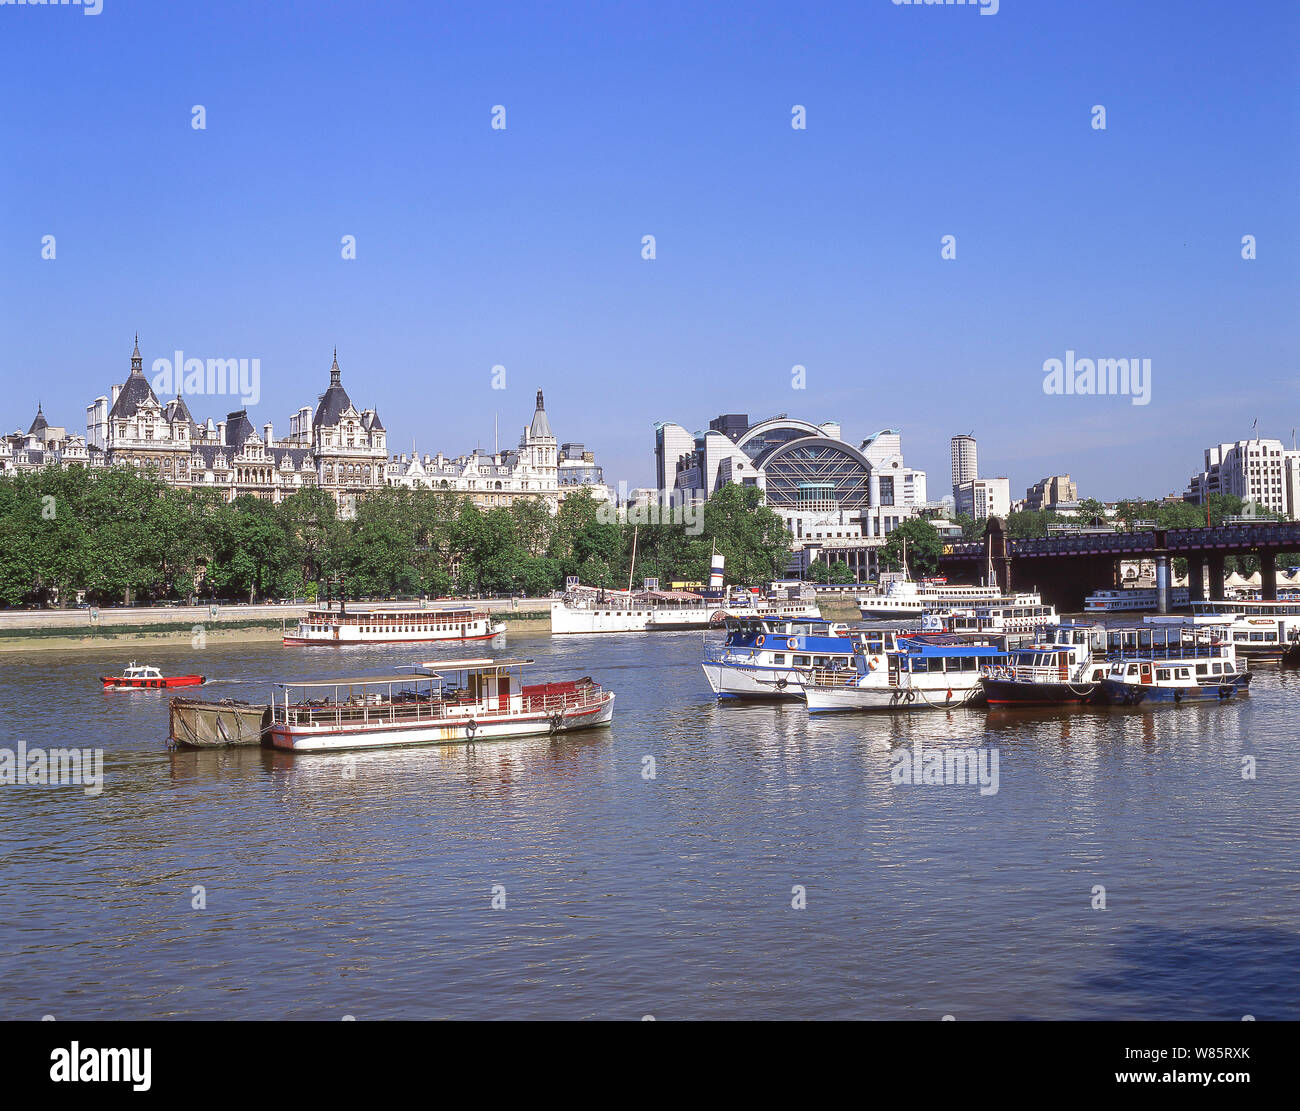 Whitehall Garden and Charing Cross Railway Station across River Thames, South Bank, London Borough of Lambeth, Greater London, England, United Kingdom Stock Photo